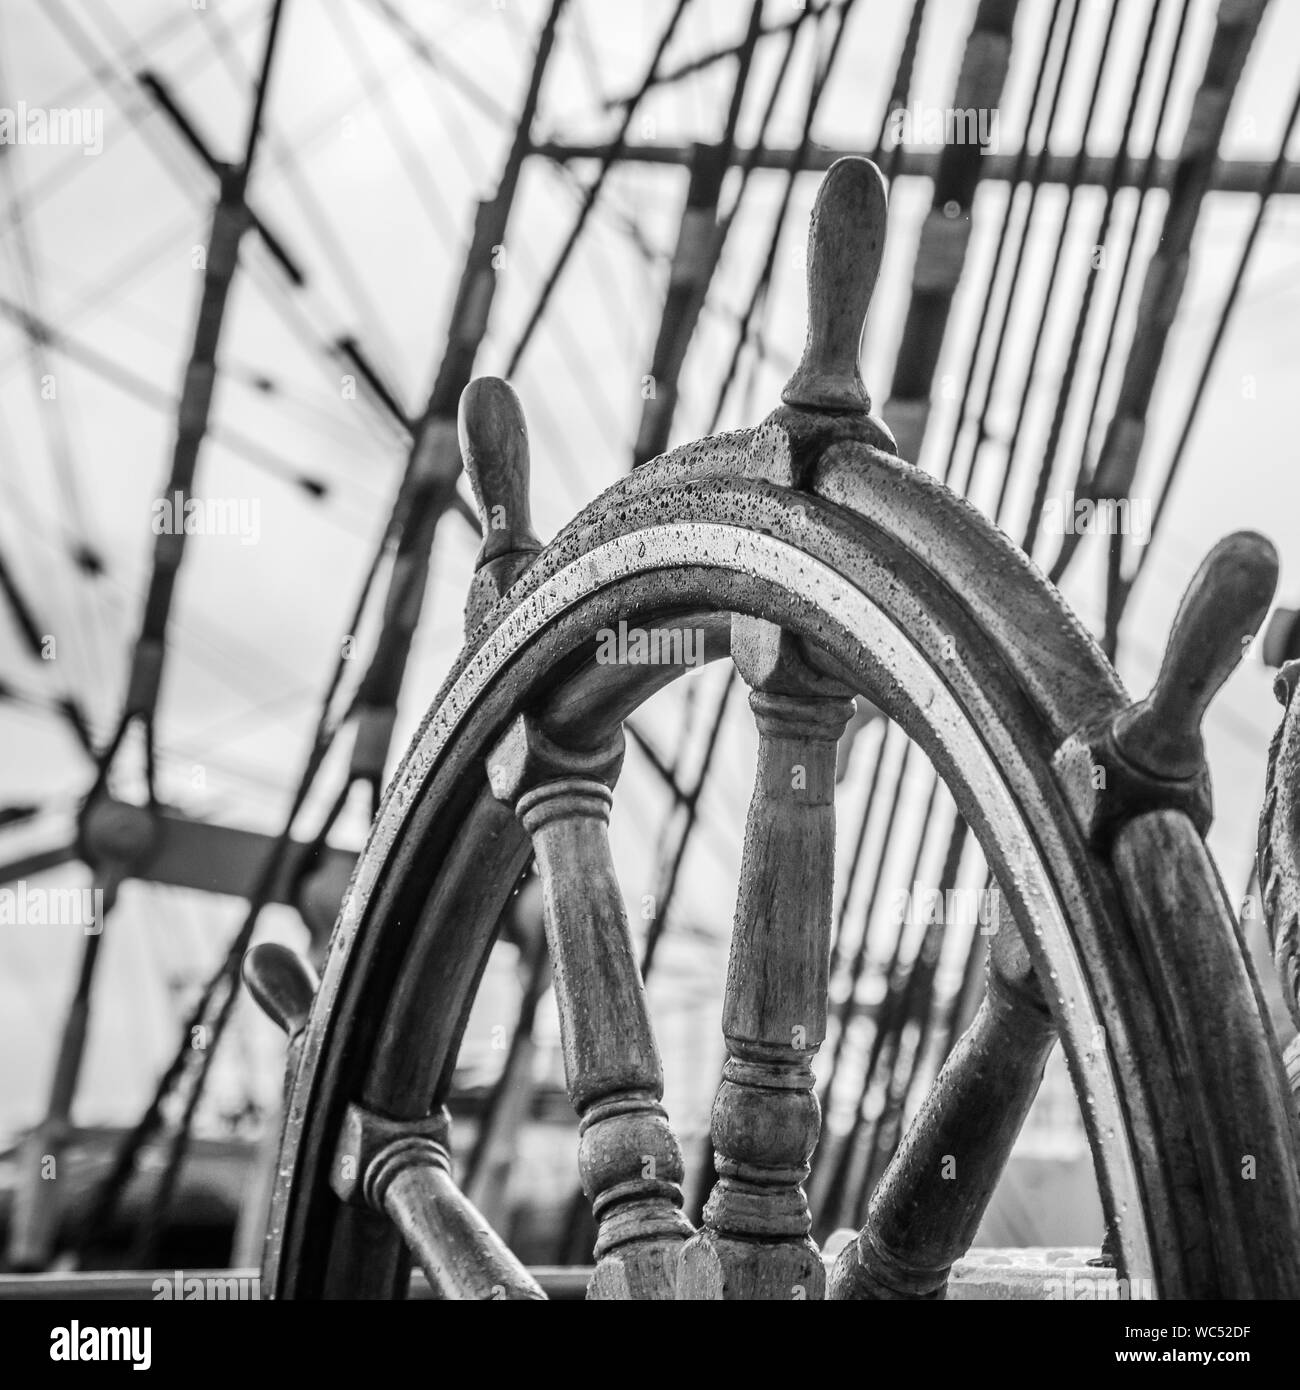 Ship's Bell and wheel the old sailboat, close-up Stock Photo